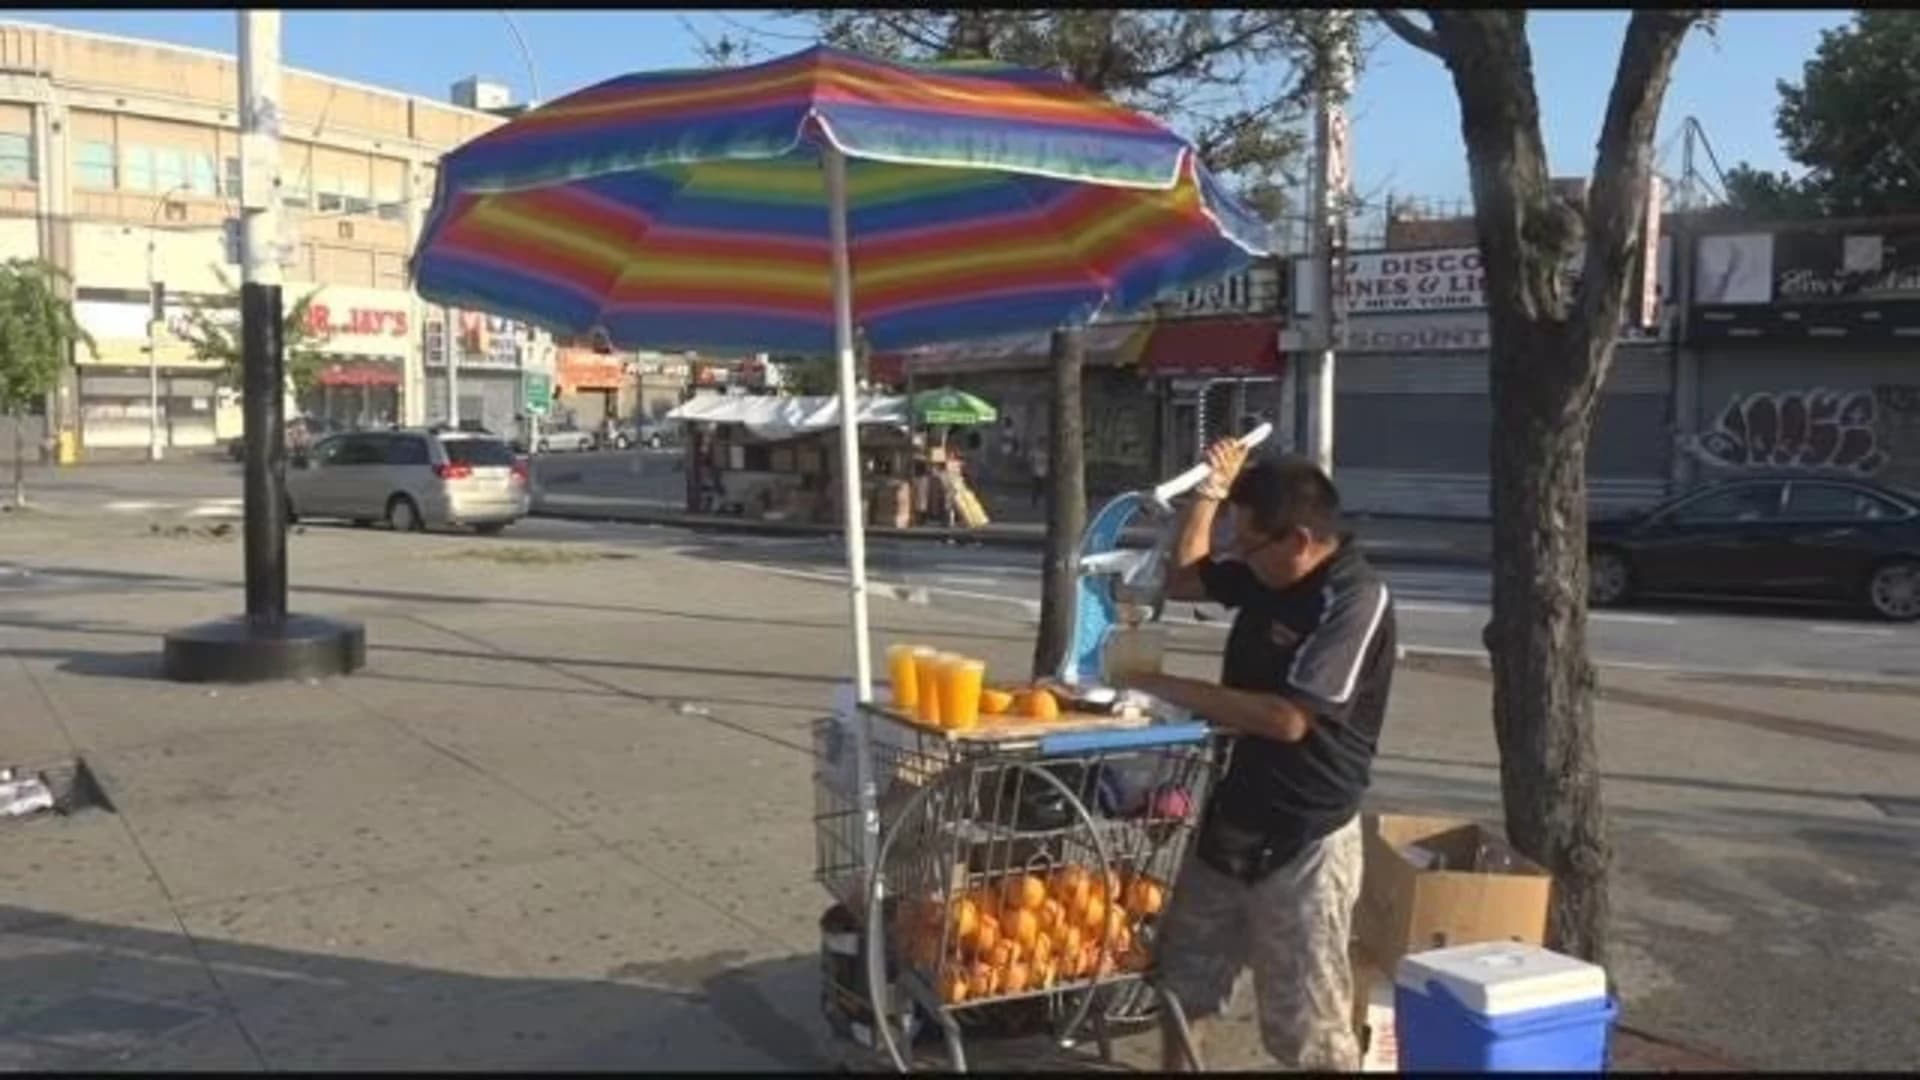 Hot temperatures return to the Bronx after days of rain